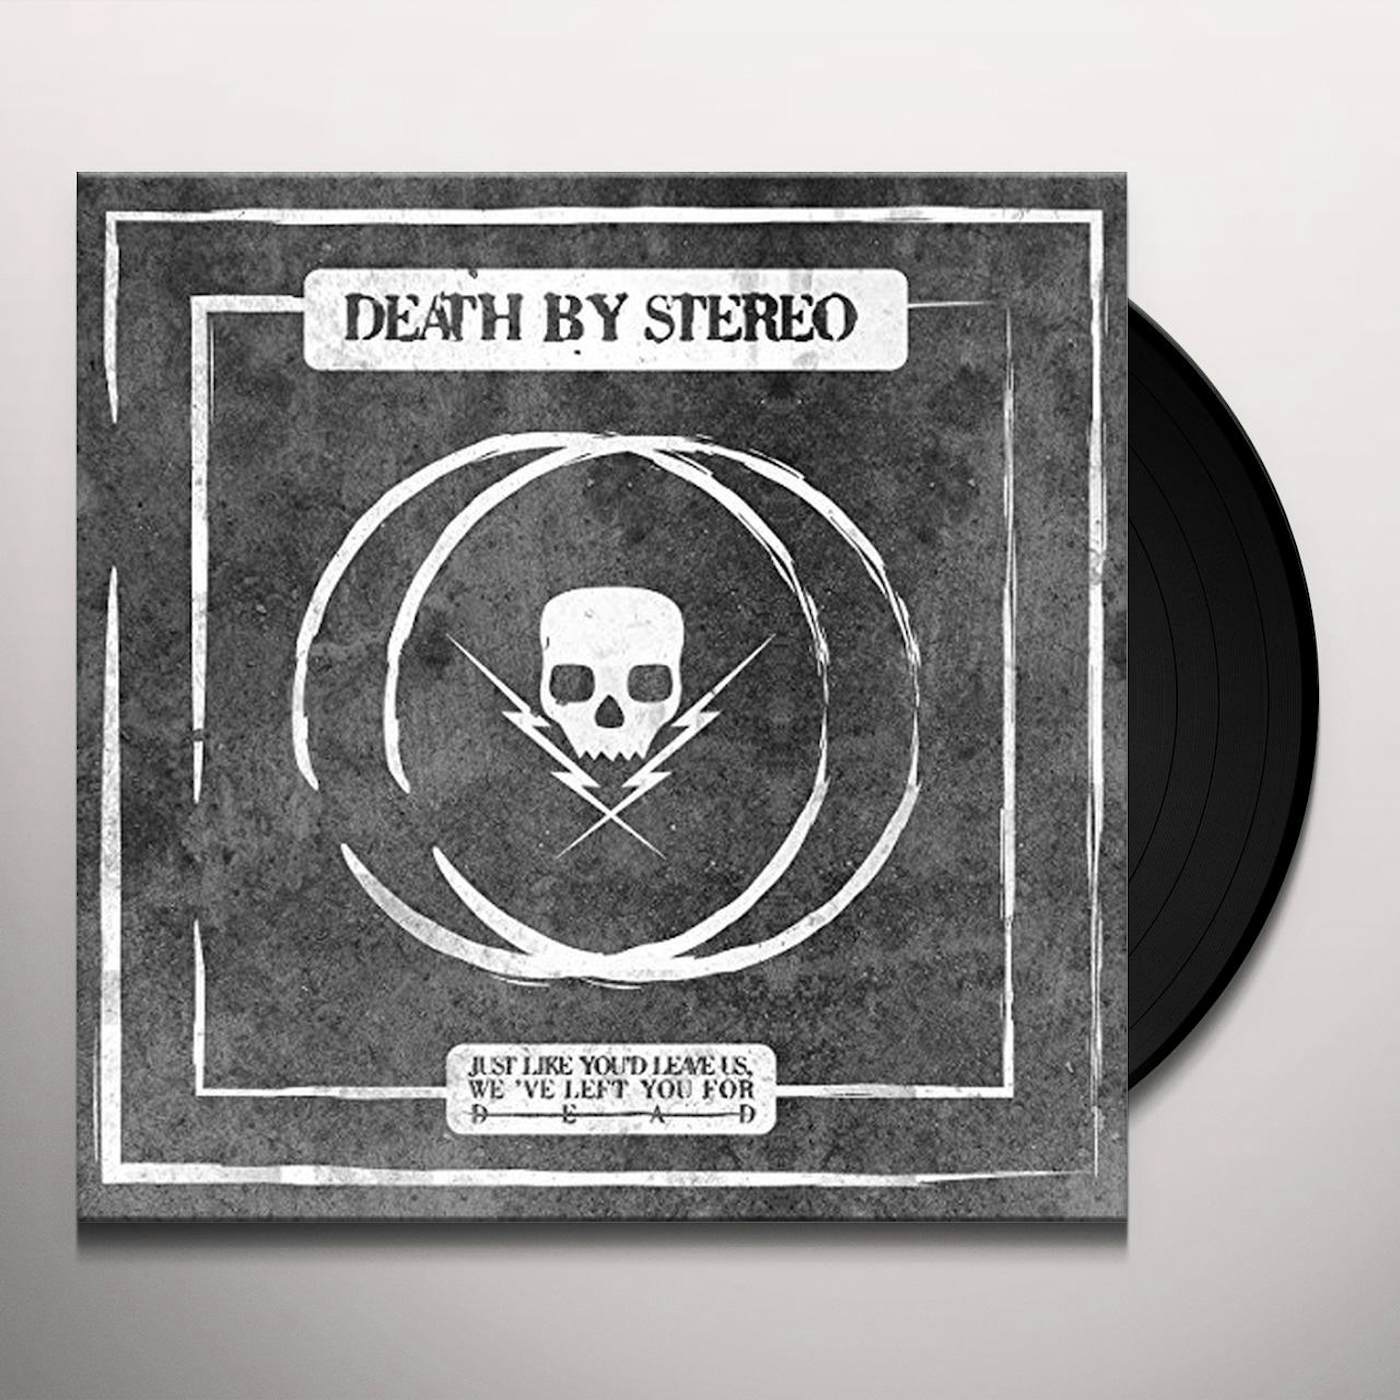 Death By Stereo JUST LIKE YOU'D LEAVE US WE'VE LEFT YOU FOR Vinyl Record